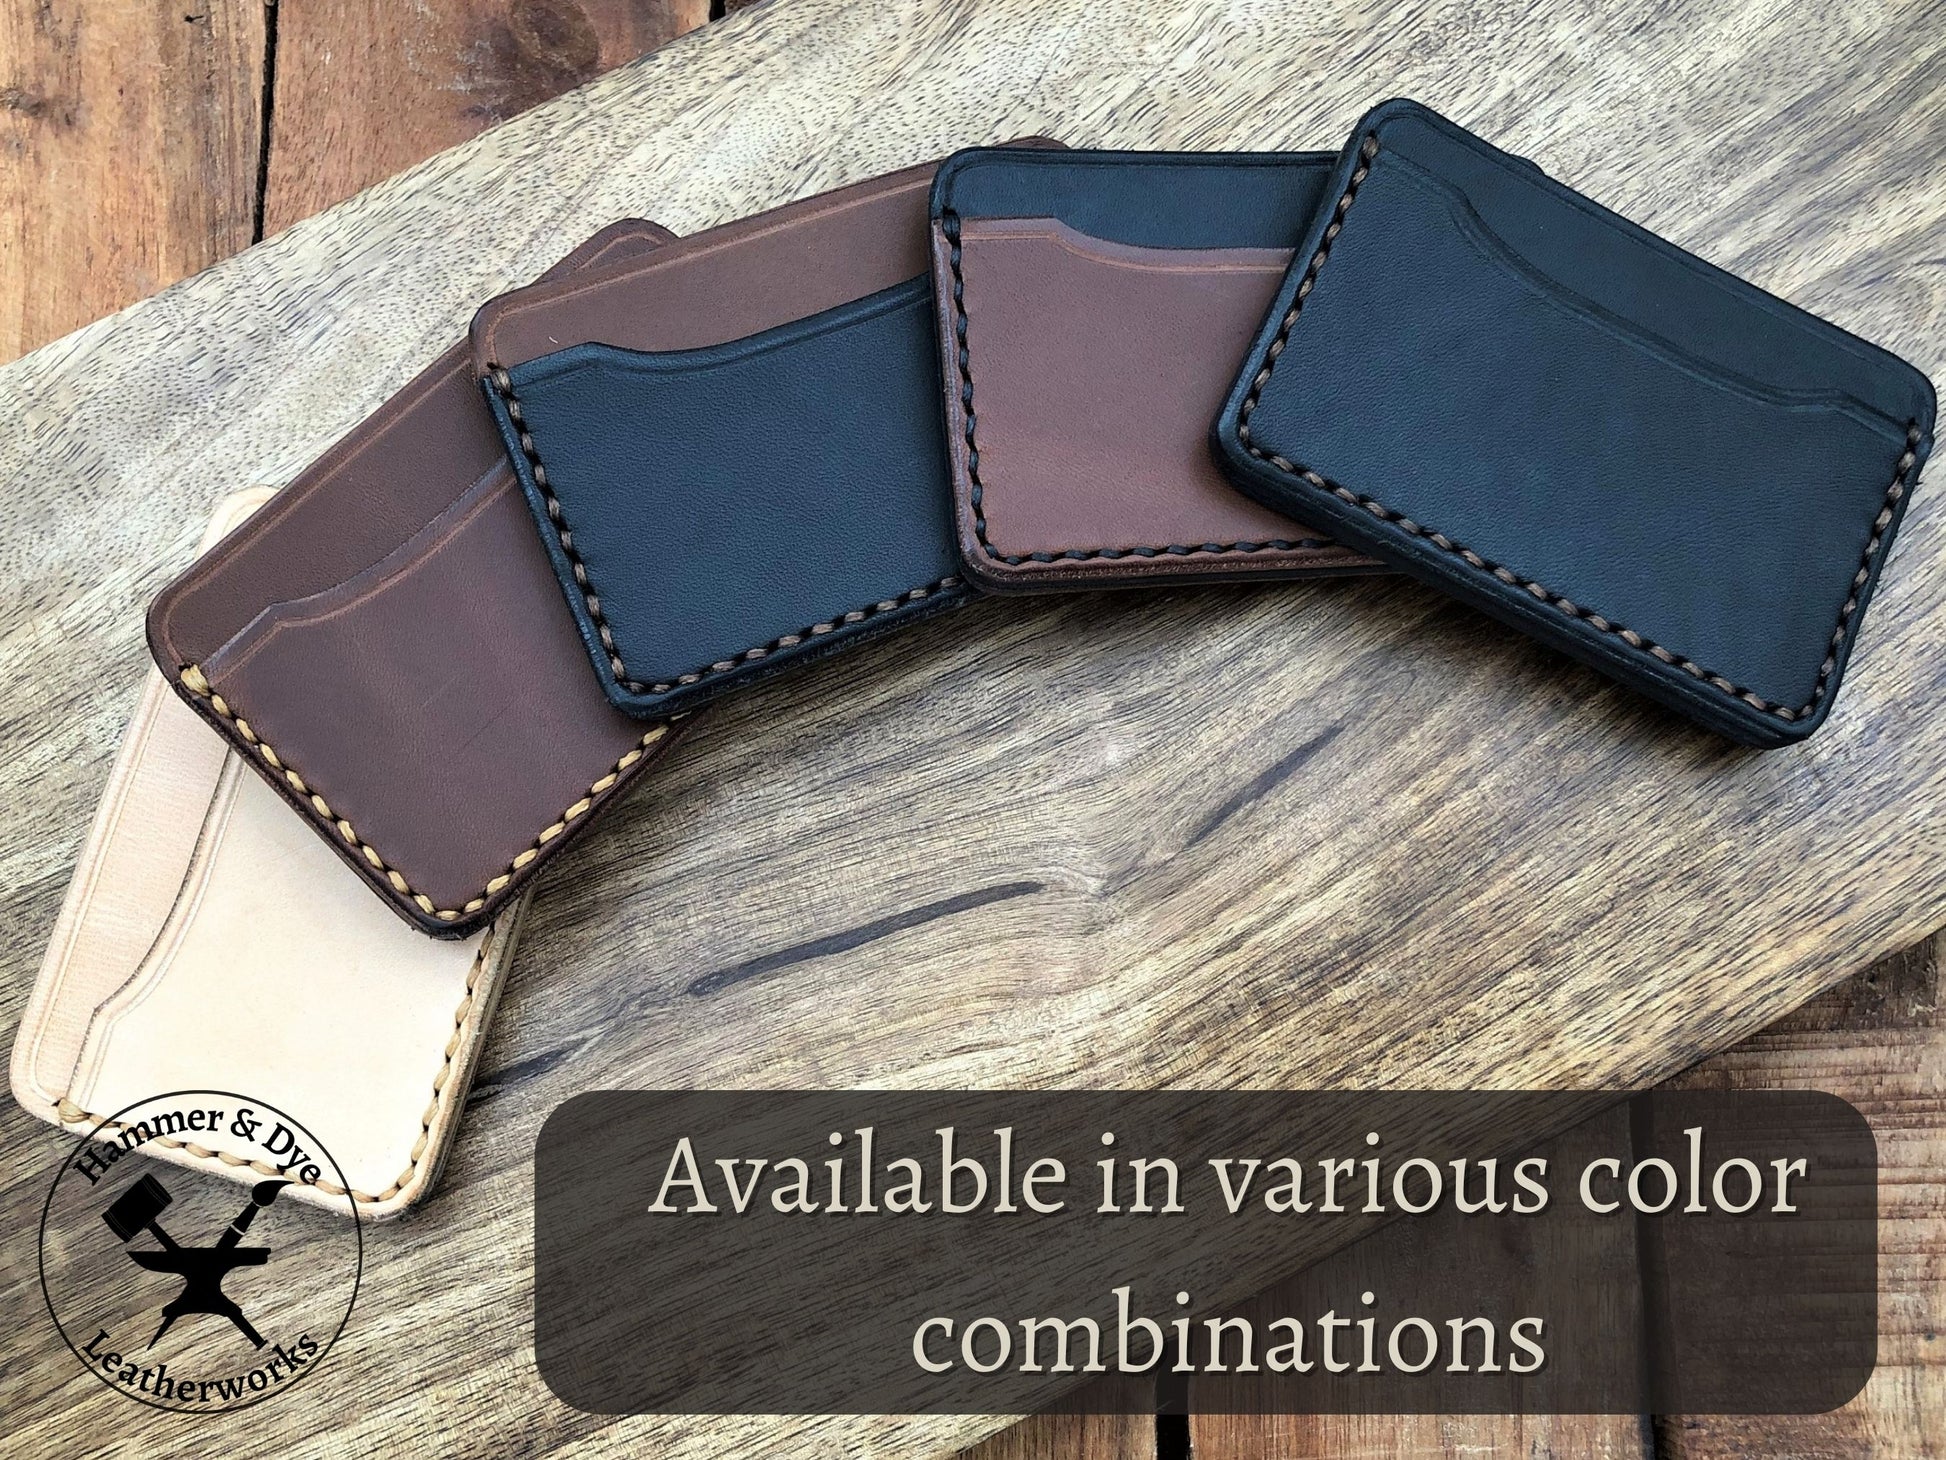 5 different handmade card wallets in the available color combinations